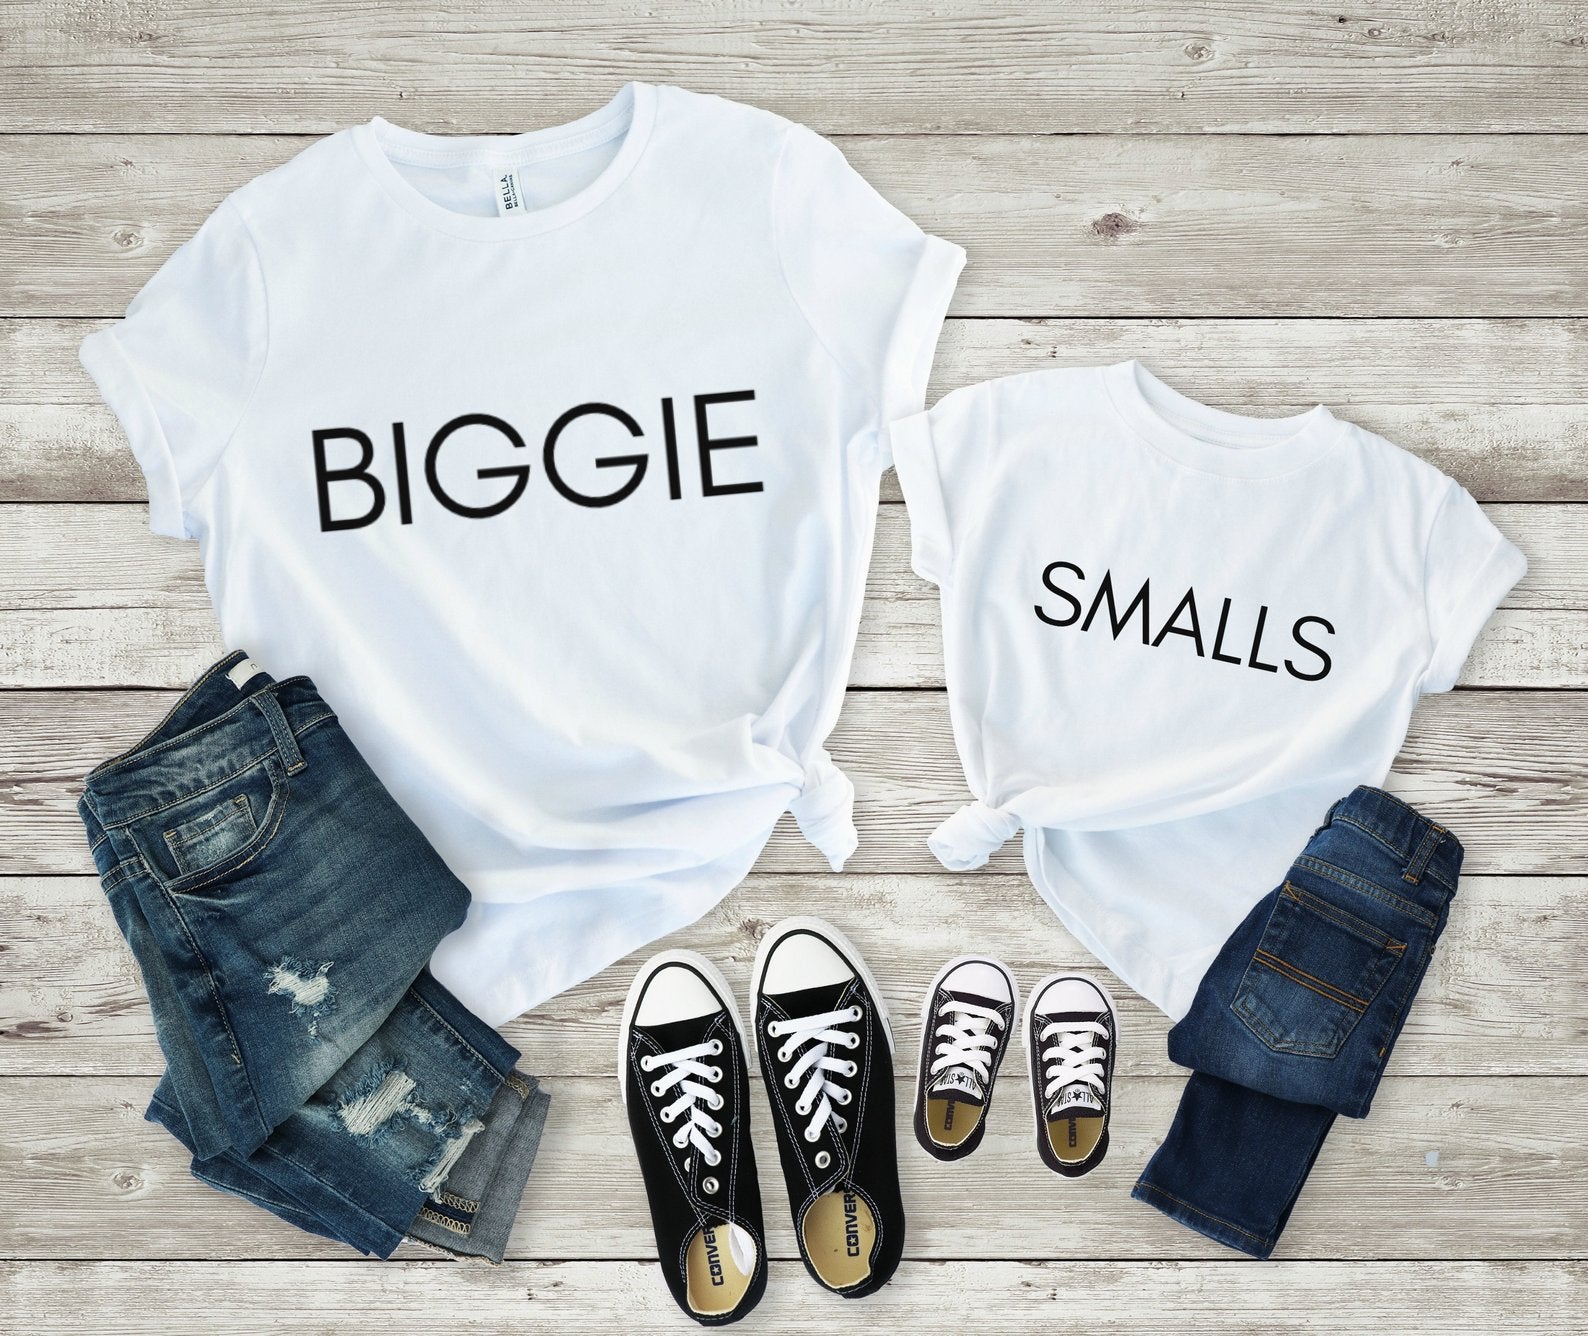 Step Out With Your Little One In These Adorable Mommy & Me Outfits